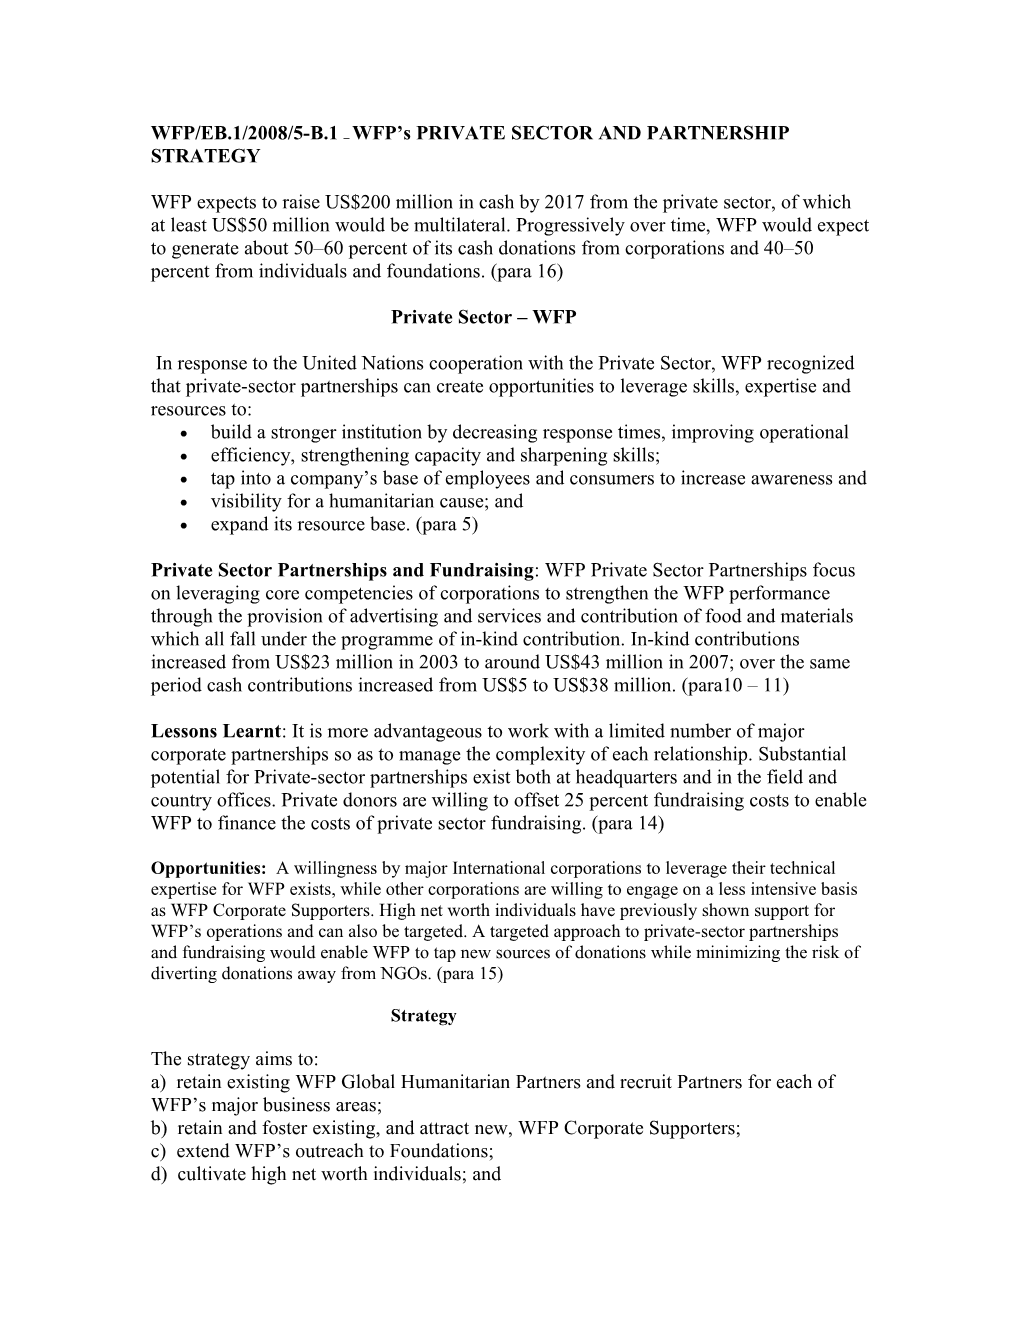 WFP/EB.1/2008/5-B.1 WFP S PRIVATE SECTOR and PARTNERSHIP STRATEGY